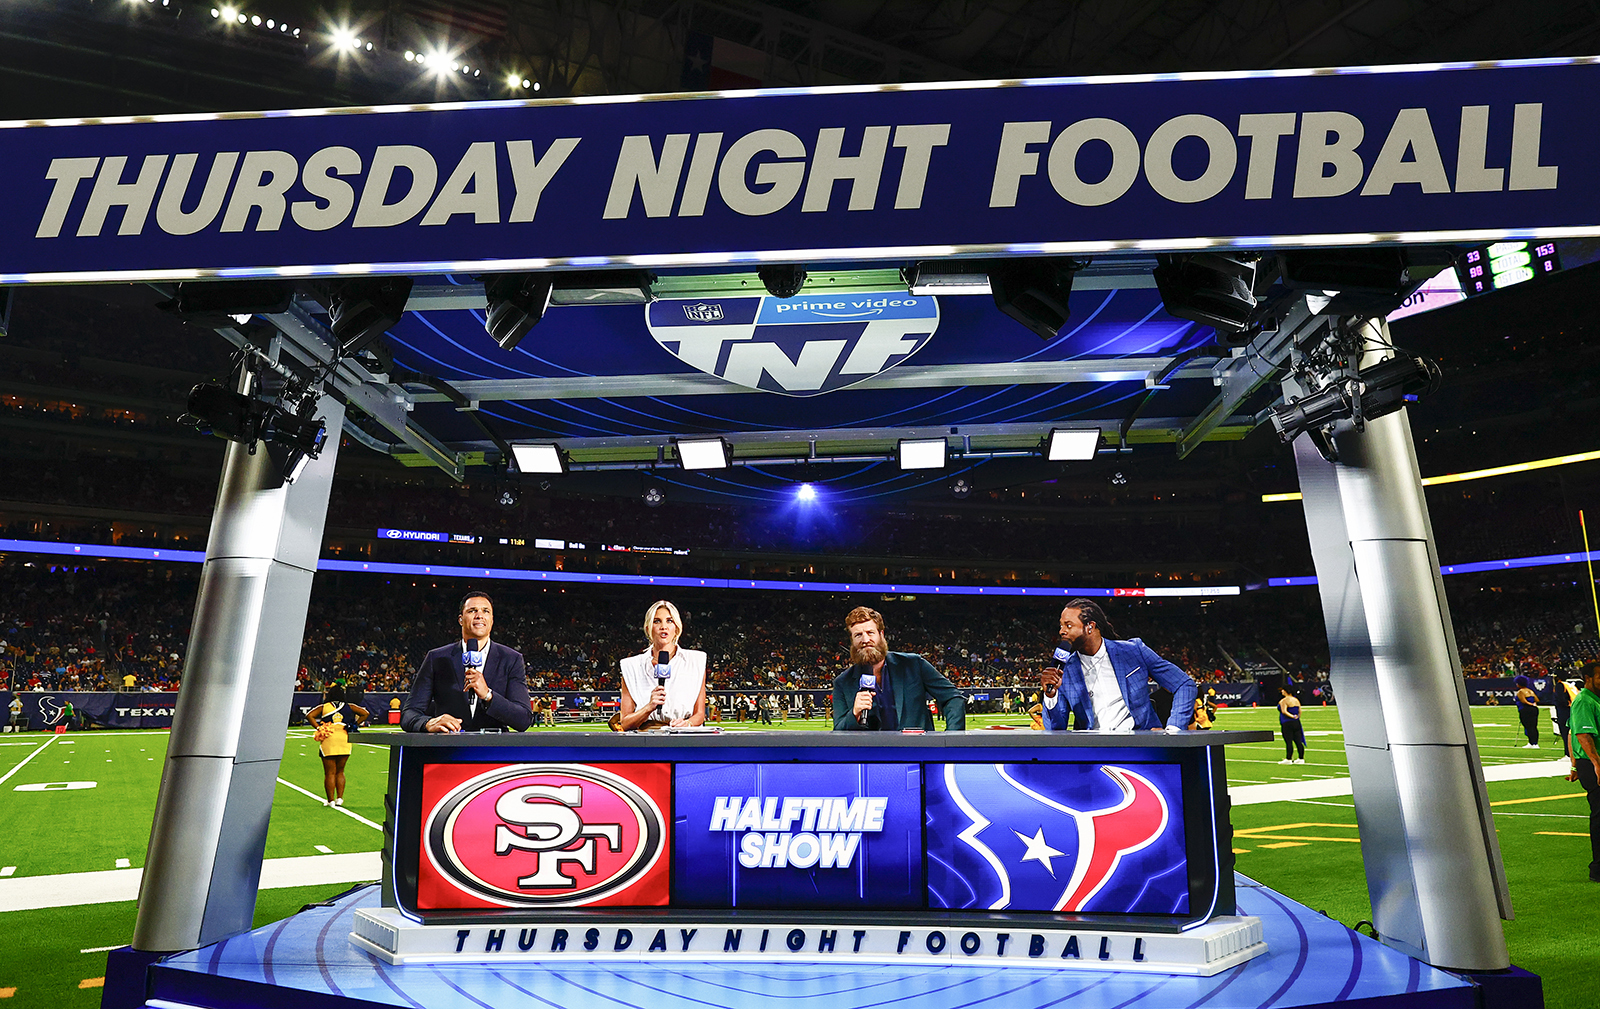 Thursday Night Football Deep Dive Amazon Prime Video Embraces HDR, AI, Next-Gen Stats in Year 2 of Exclusive NFL Package